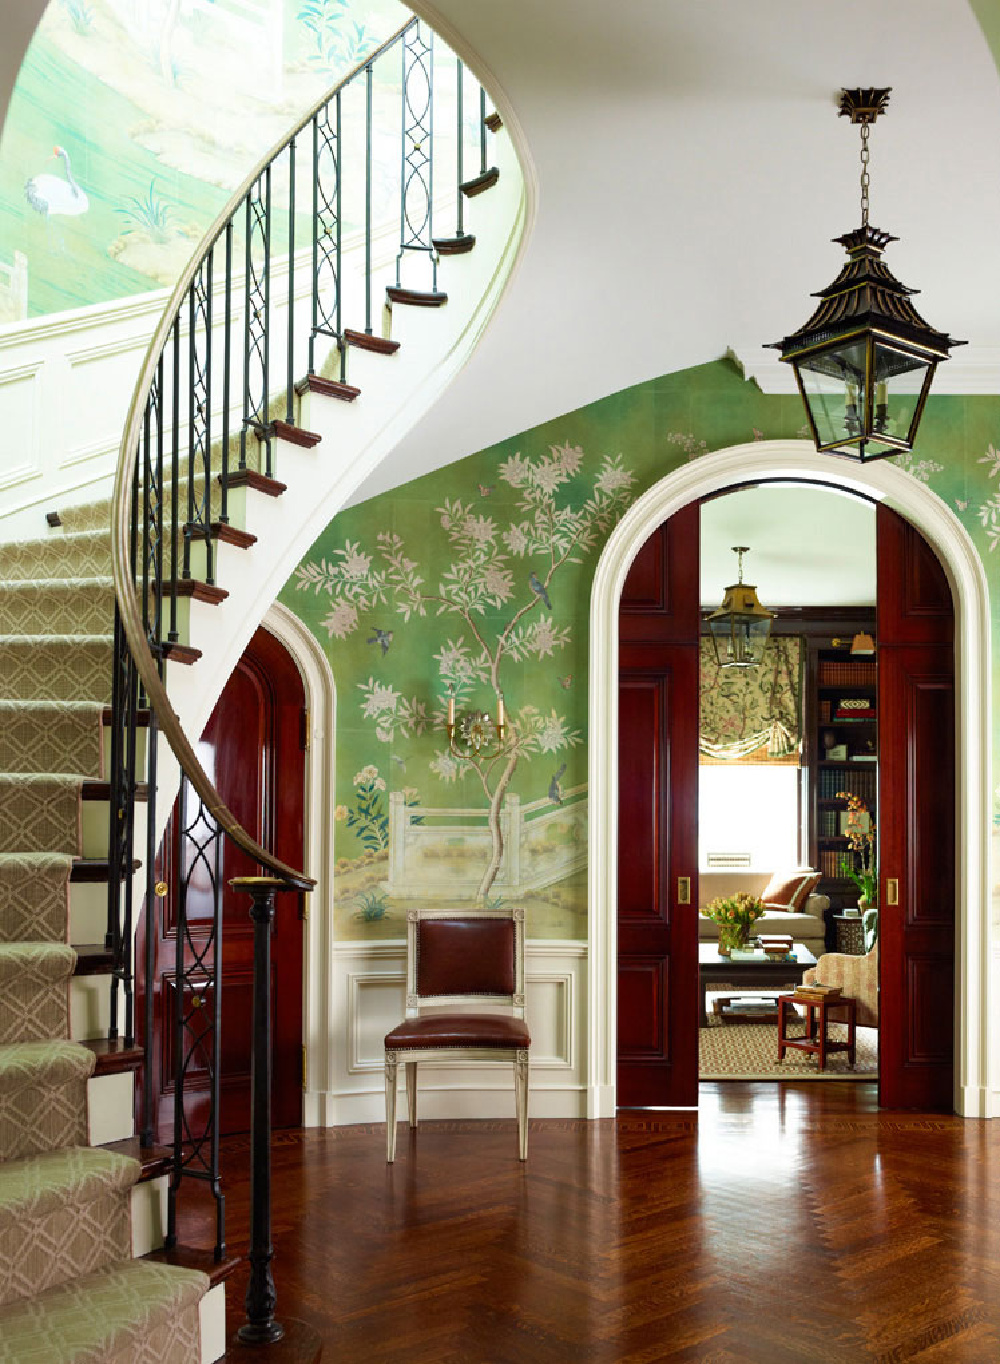 Green plays a starring role in this Ashley Whittaker designed interior with elegant staircase, Gracie wallpaper, and arched doorway. #traditionalstyle #greeninterior